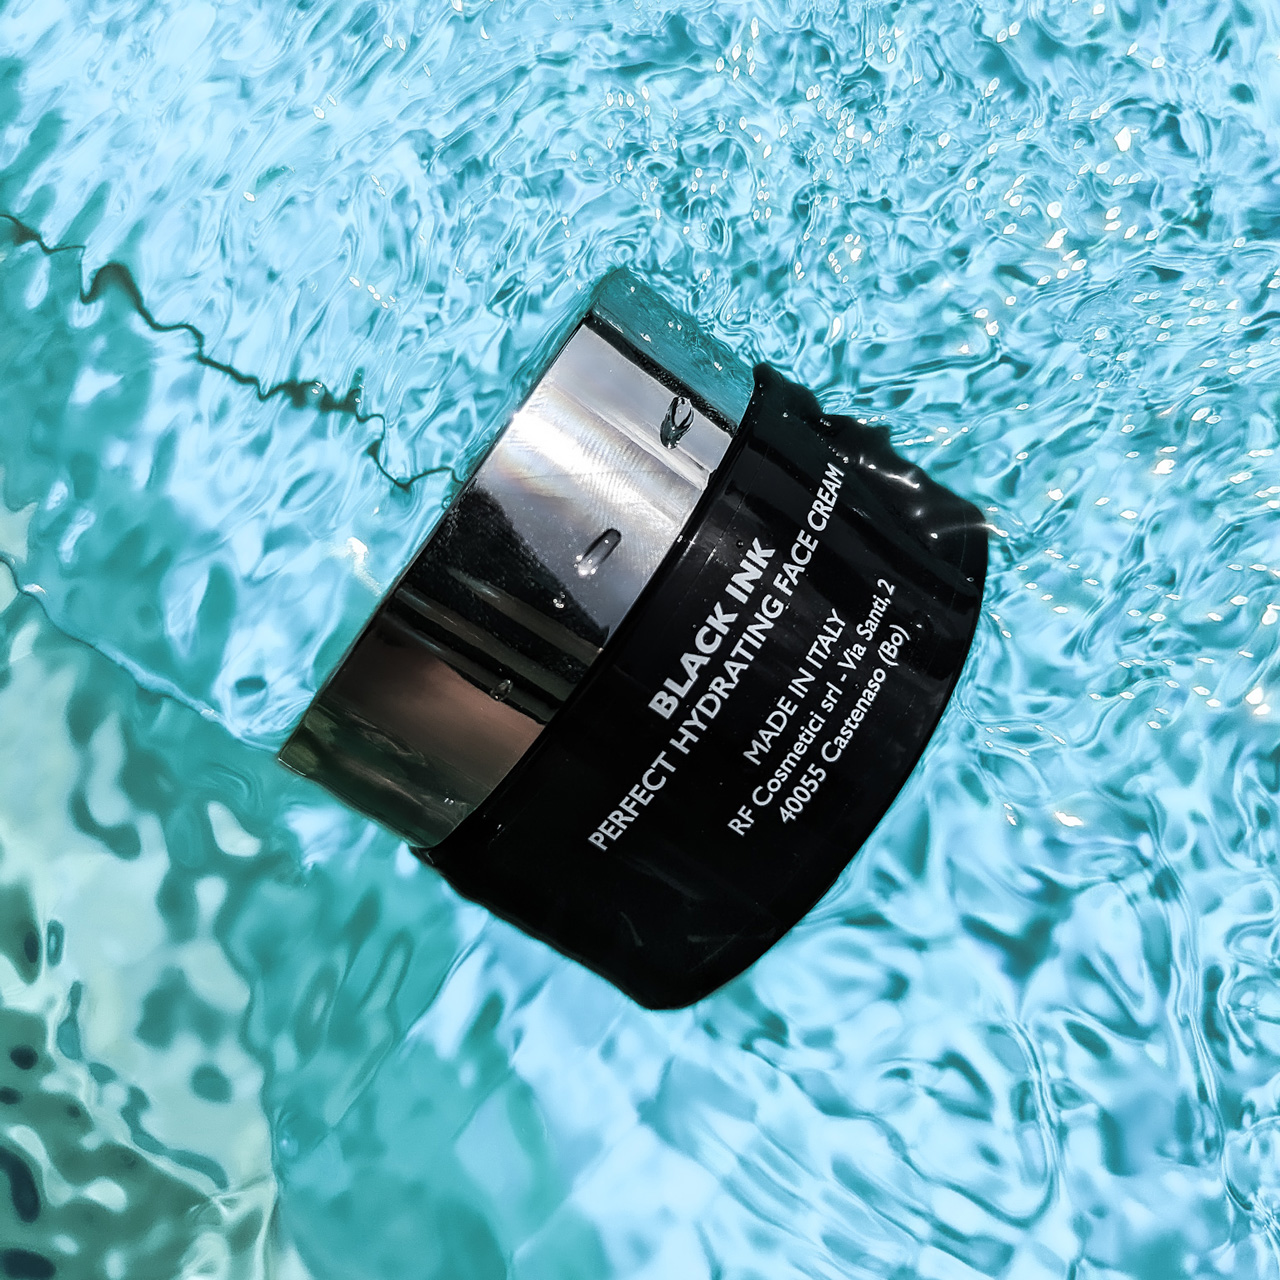 Black Ink perfect hydrating face cream TdS water shooting